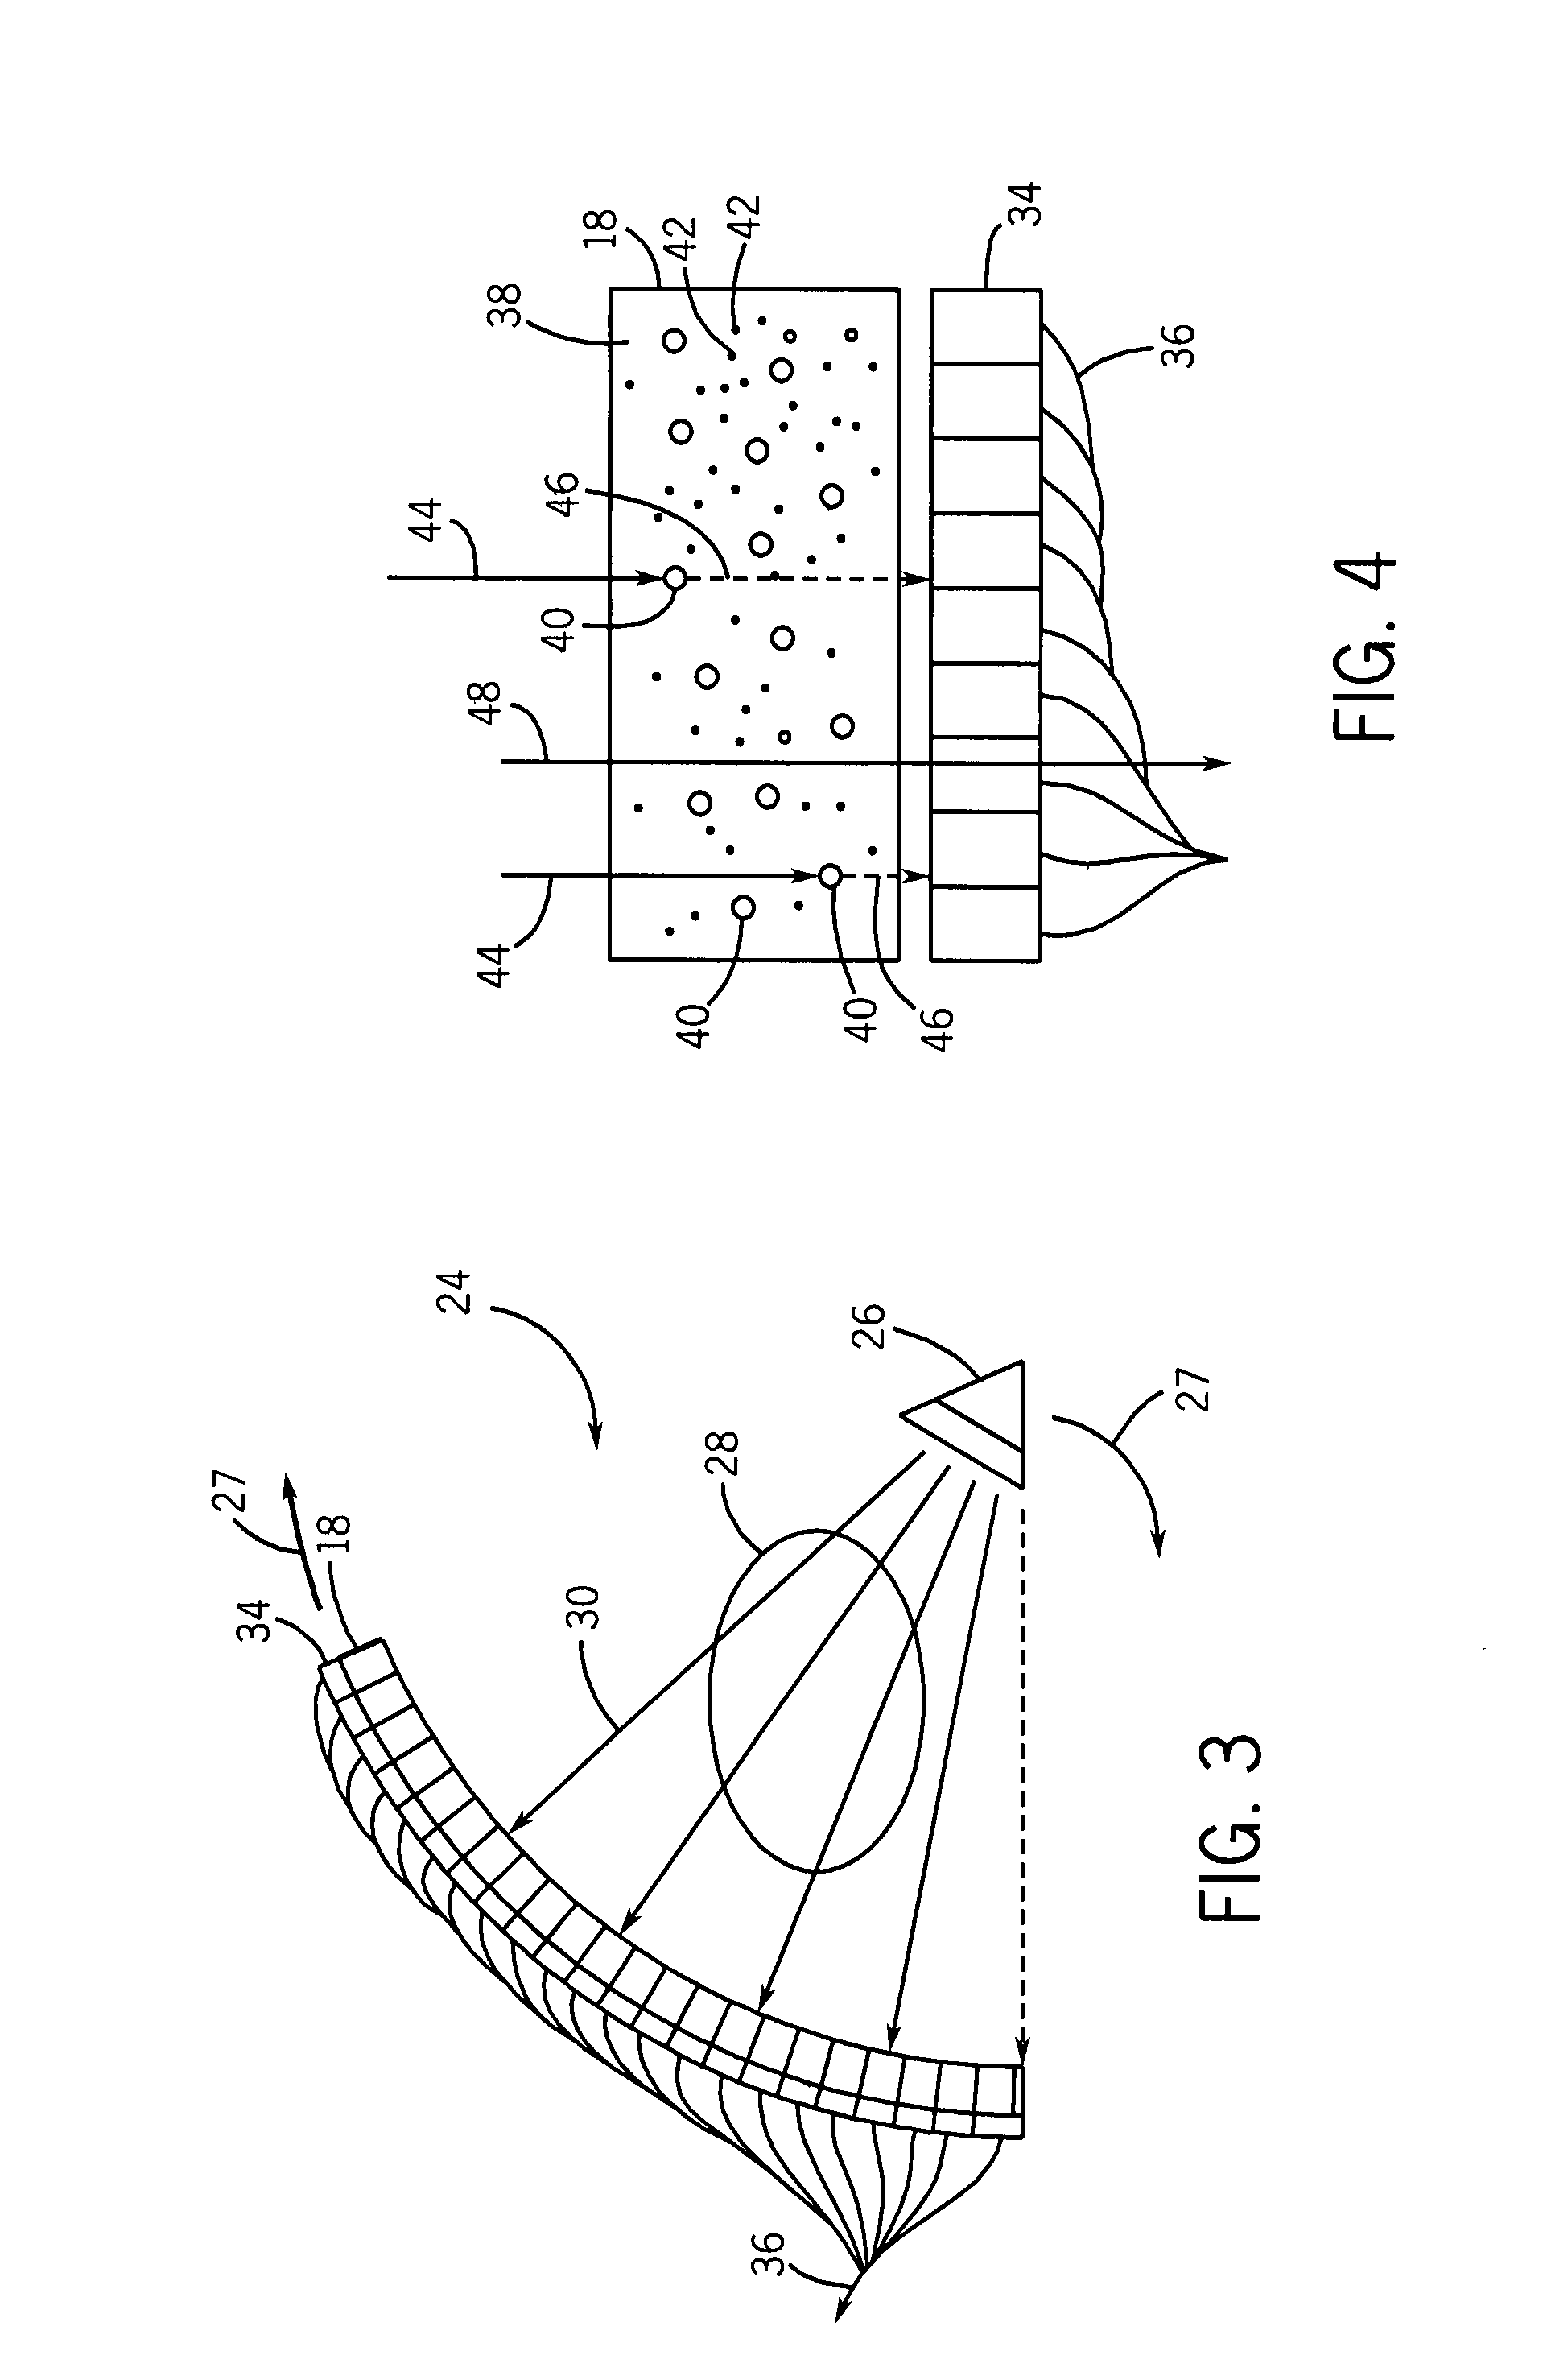 Nano-scale metal oxide, oxyhalide and oxysulfide scintillation materials and methods for making same